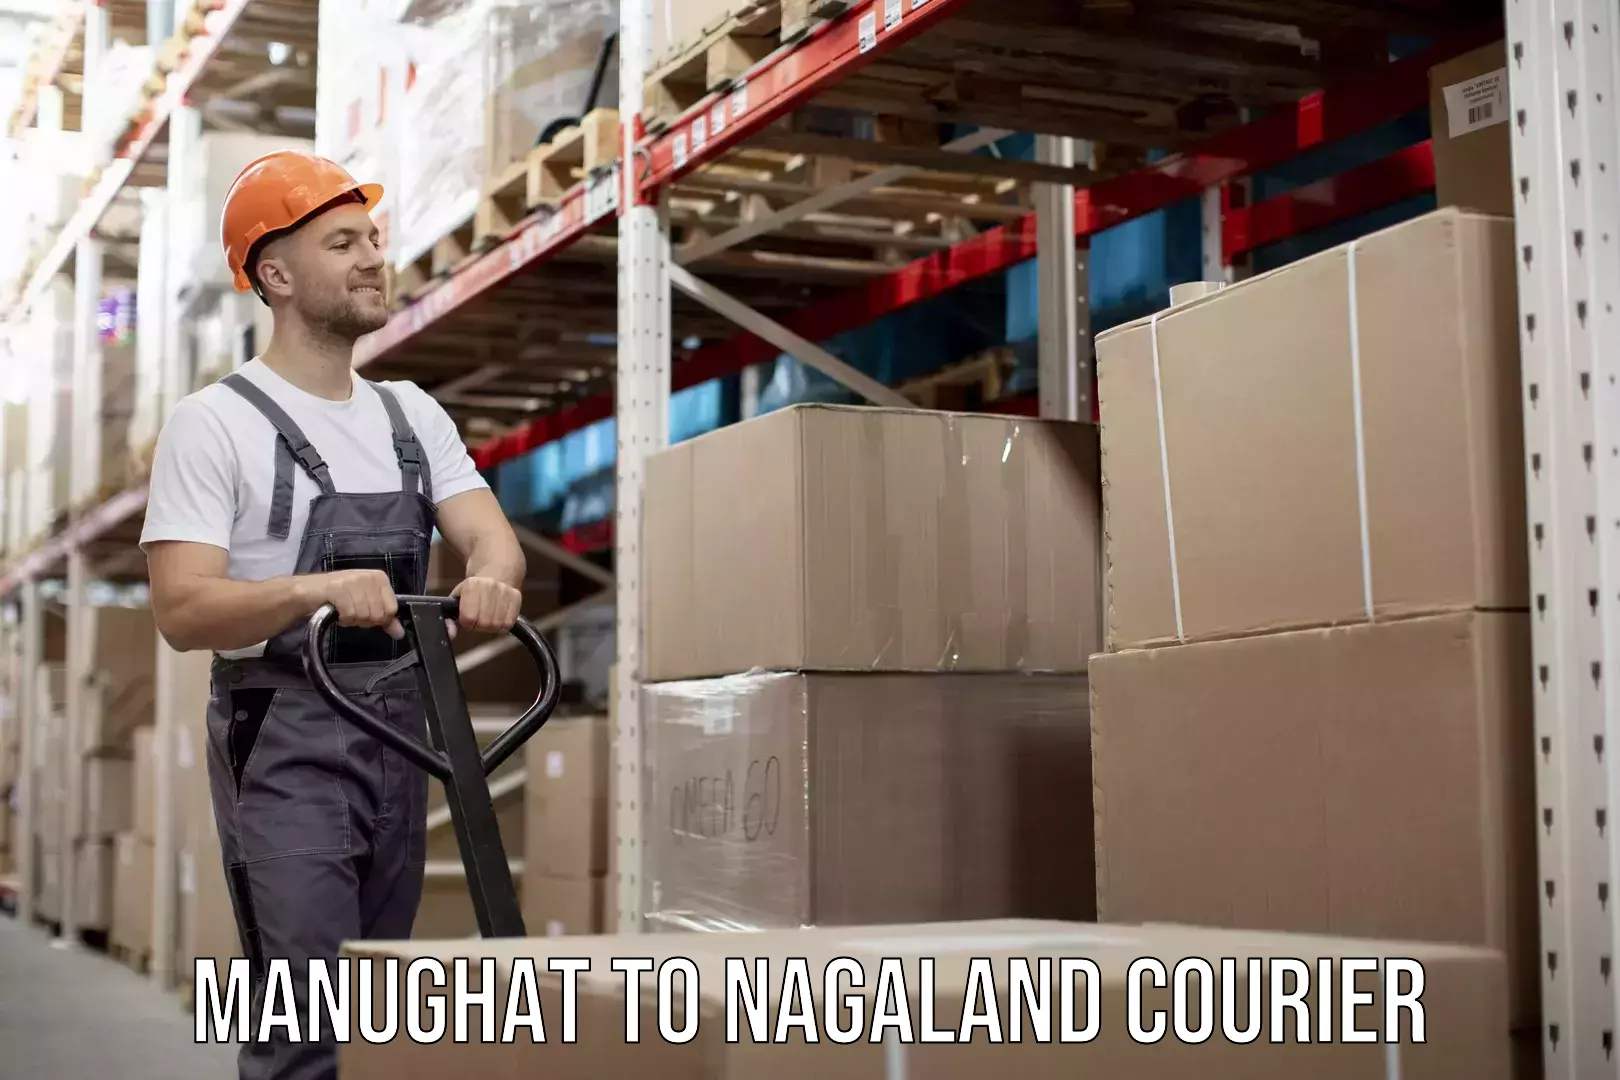 Quality courier partnerships Manughat to Nagaland